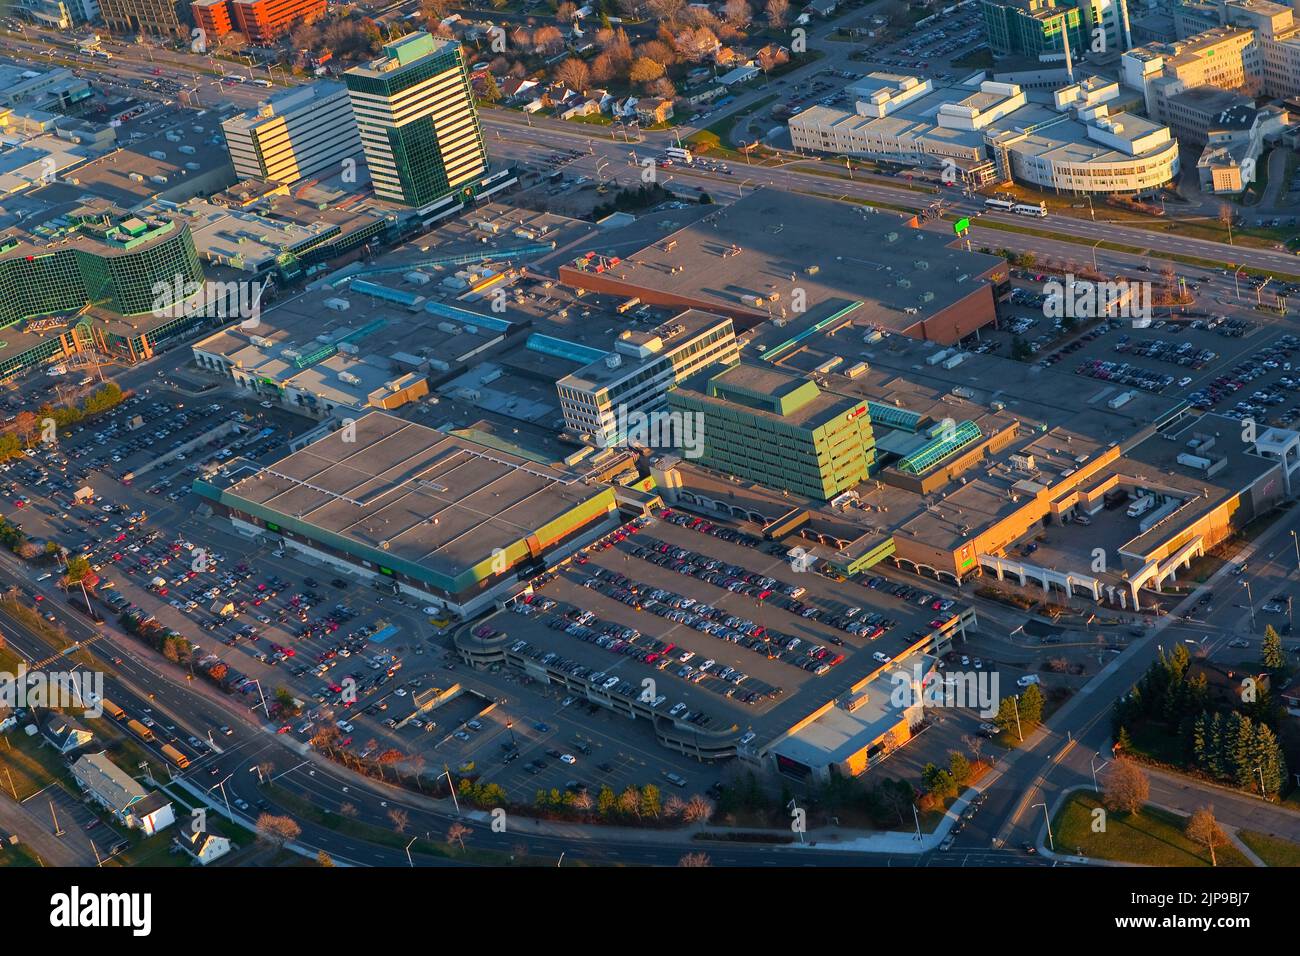 Laurier Quebec shopping Mall in Quebec city is pictured in this aerial photo November 11, 2009. First indoor mall in the province of Quebec, Laurier Quebec (formerly known as Place Laurier) is one of Canada's largest shopping malls with approximately 300 stores. Stock Photo